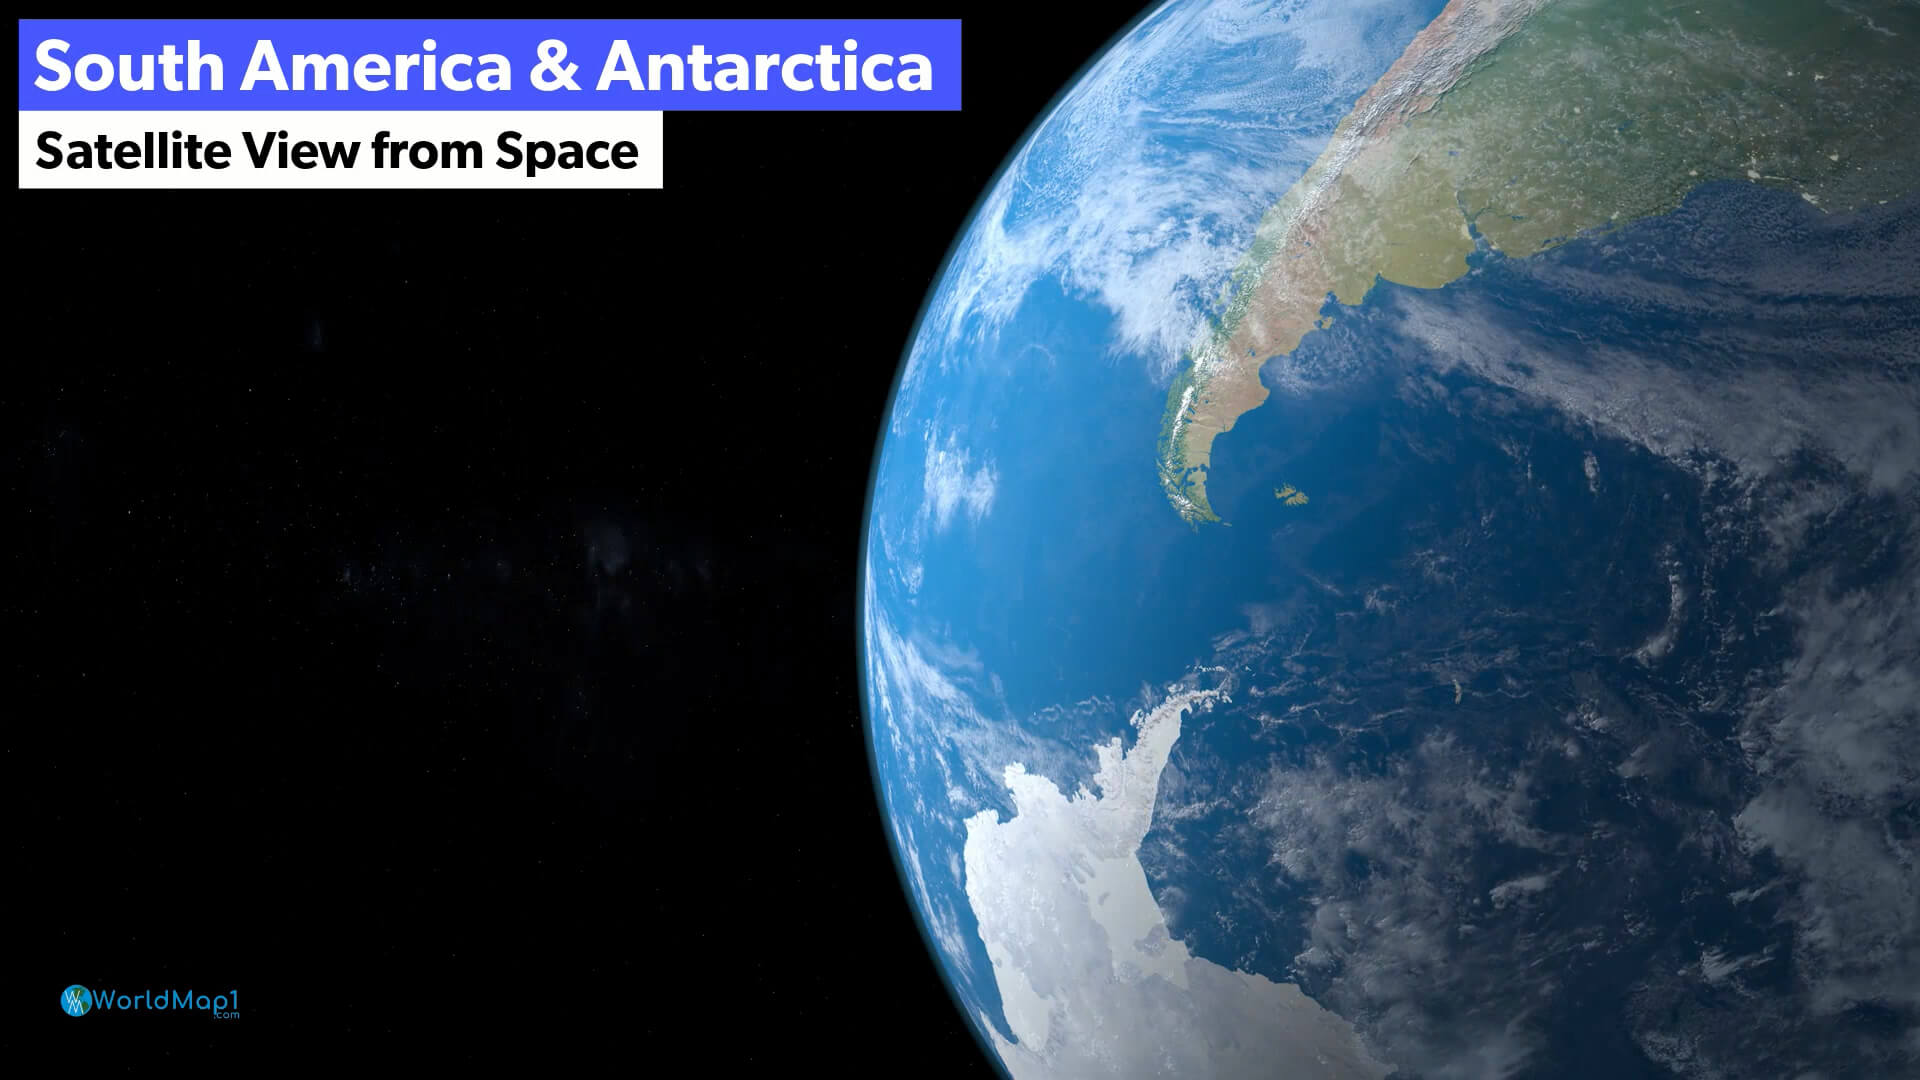 South America and Antarctica from Space